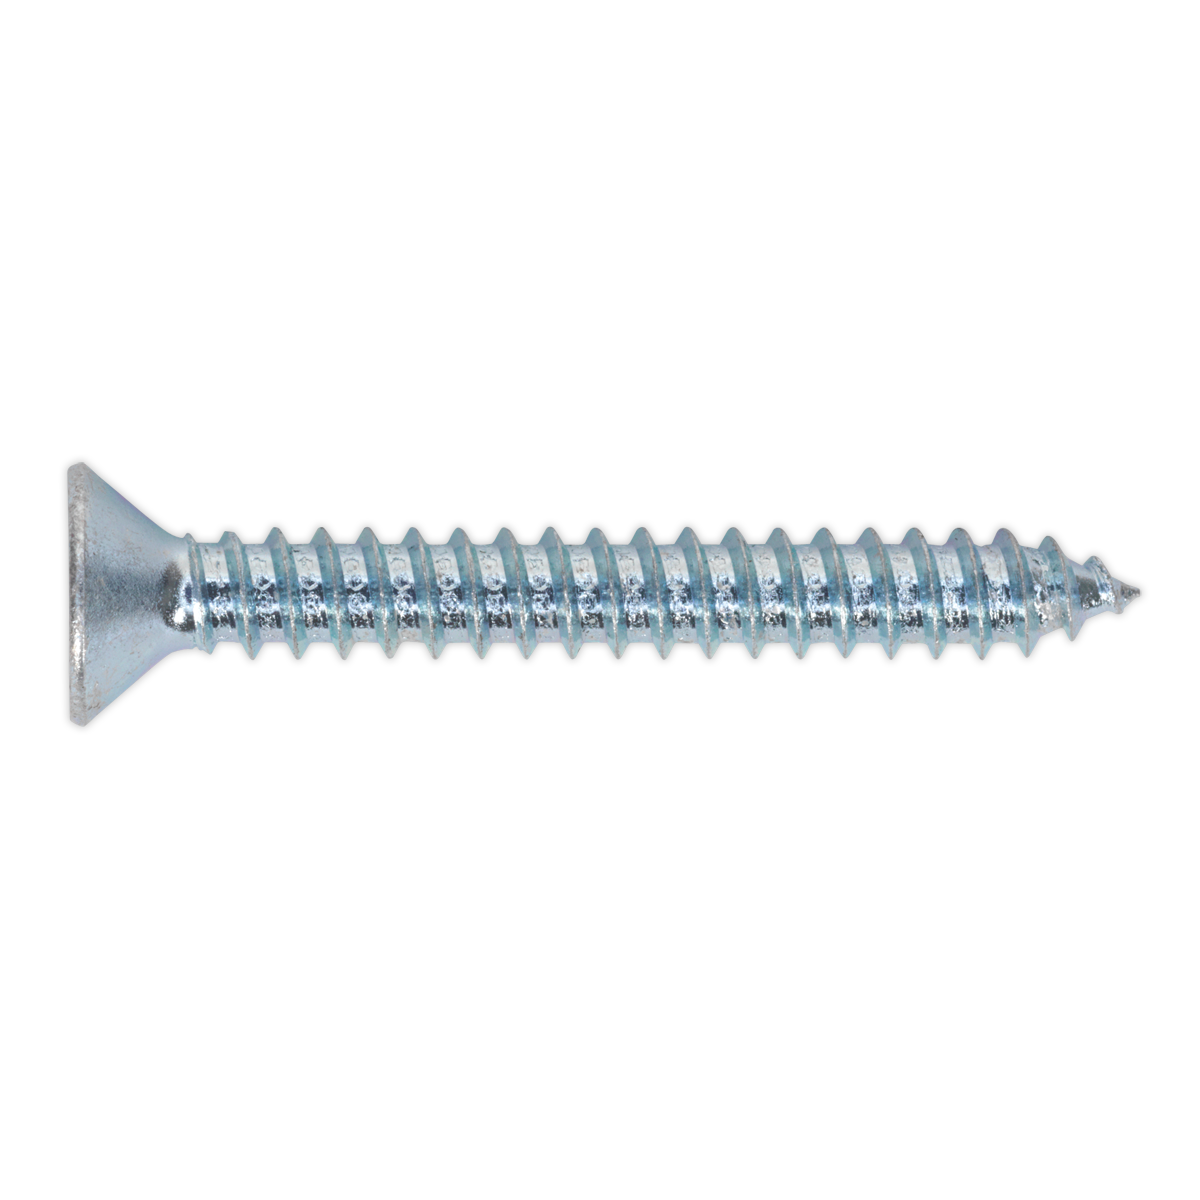 Self Tapping Screw 4.8 x 38mm Countersunk Pozi Pack of 100 - ST4838 - Farming Parts